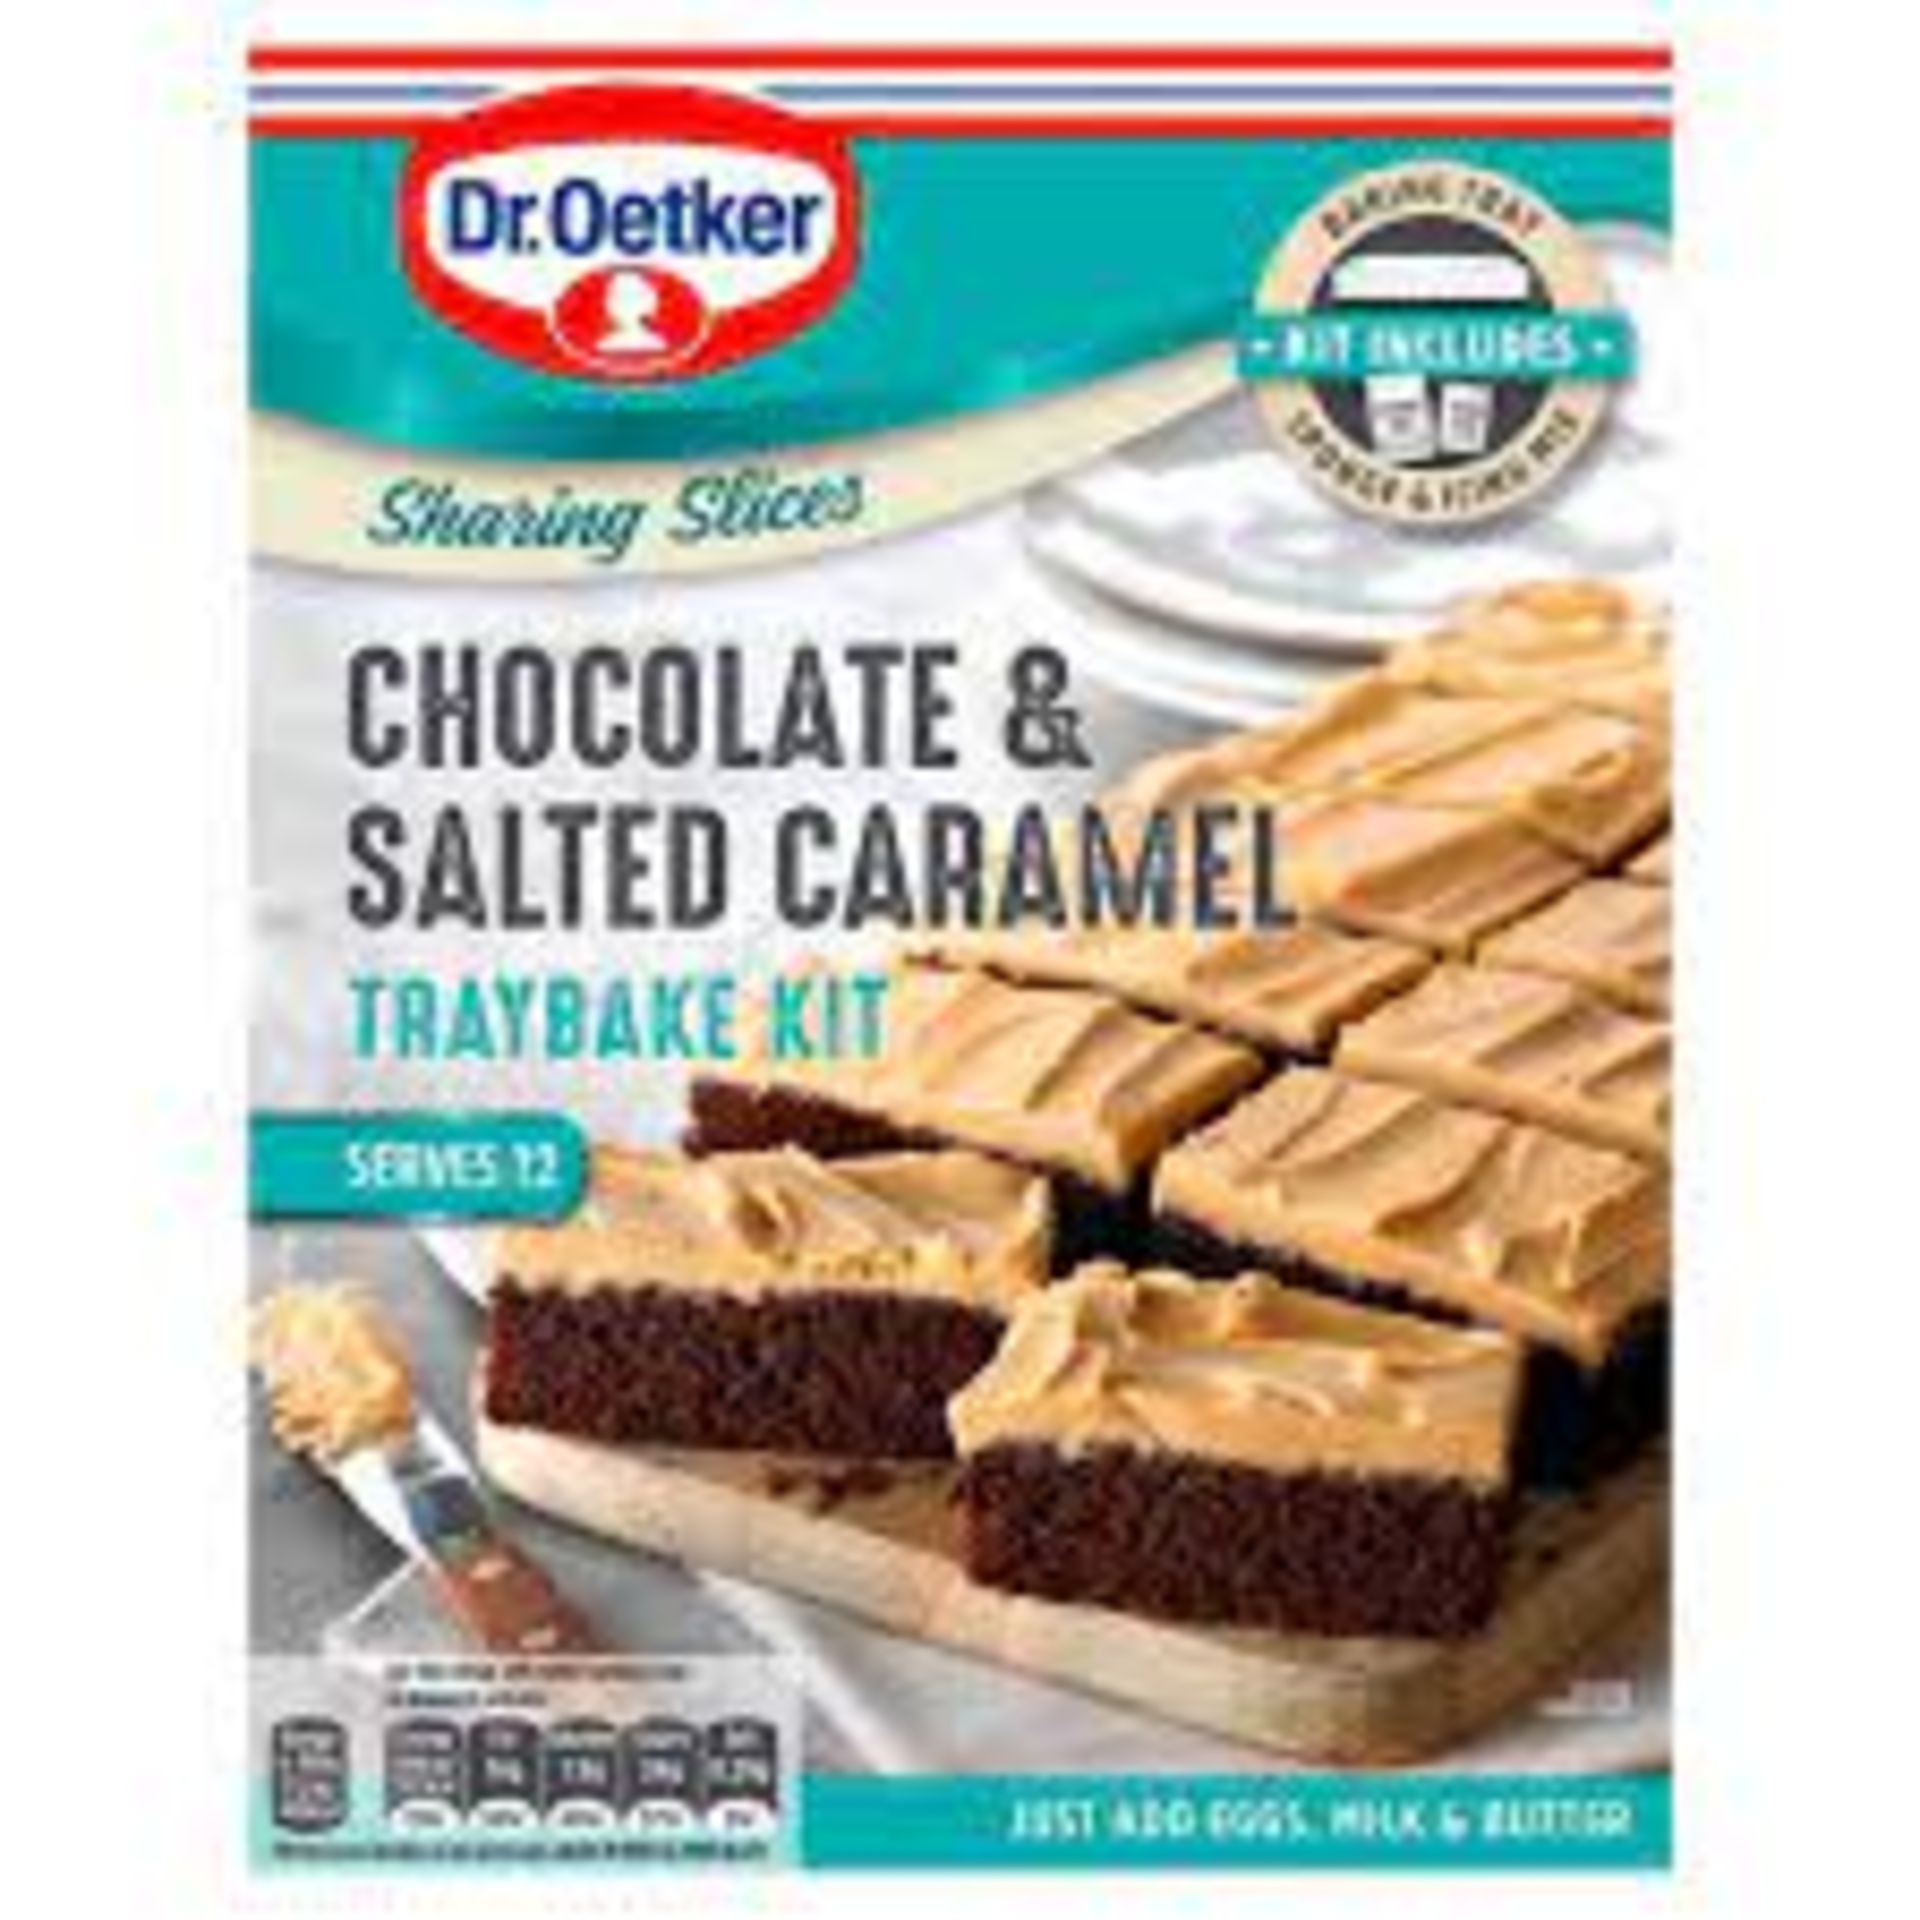 RRP £975 (Approx. Count 82) (E25) spW54e7646s 16 x Dr. Oetker Chocolate and Salted Caramel - Image 2 of 2